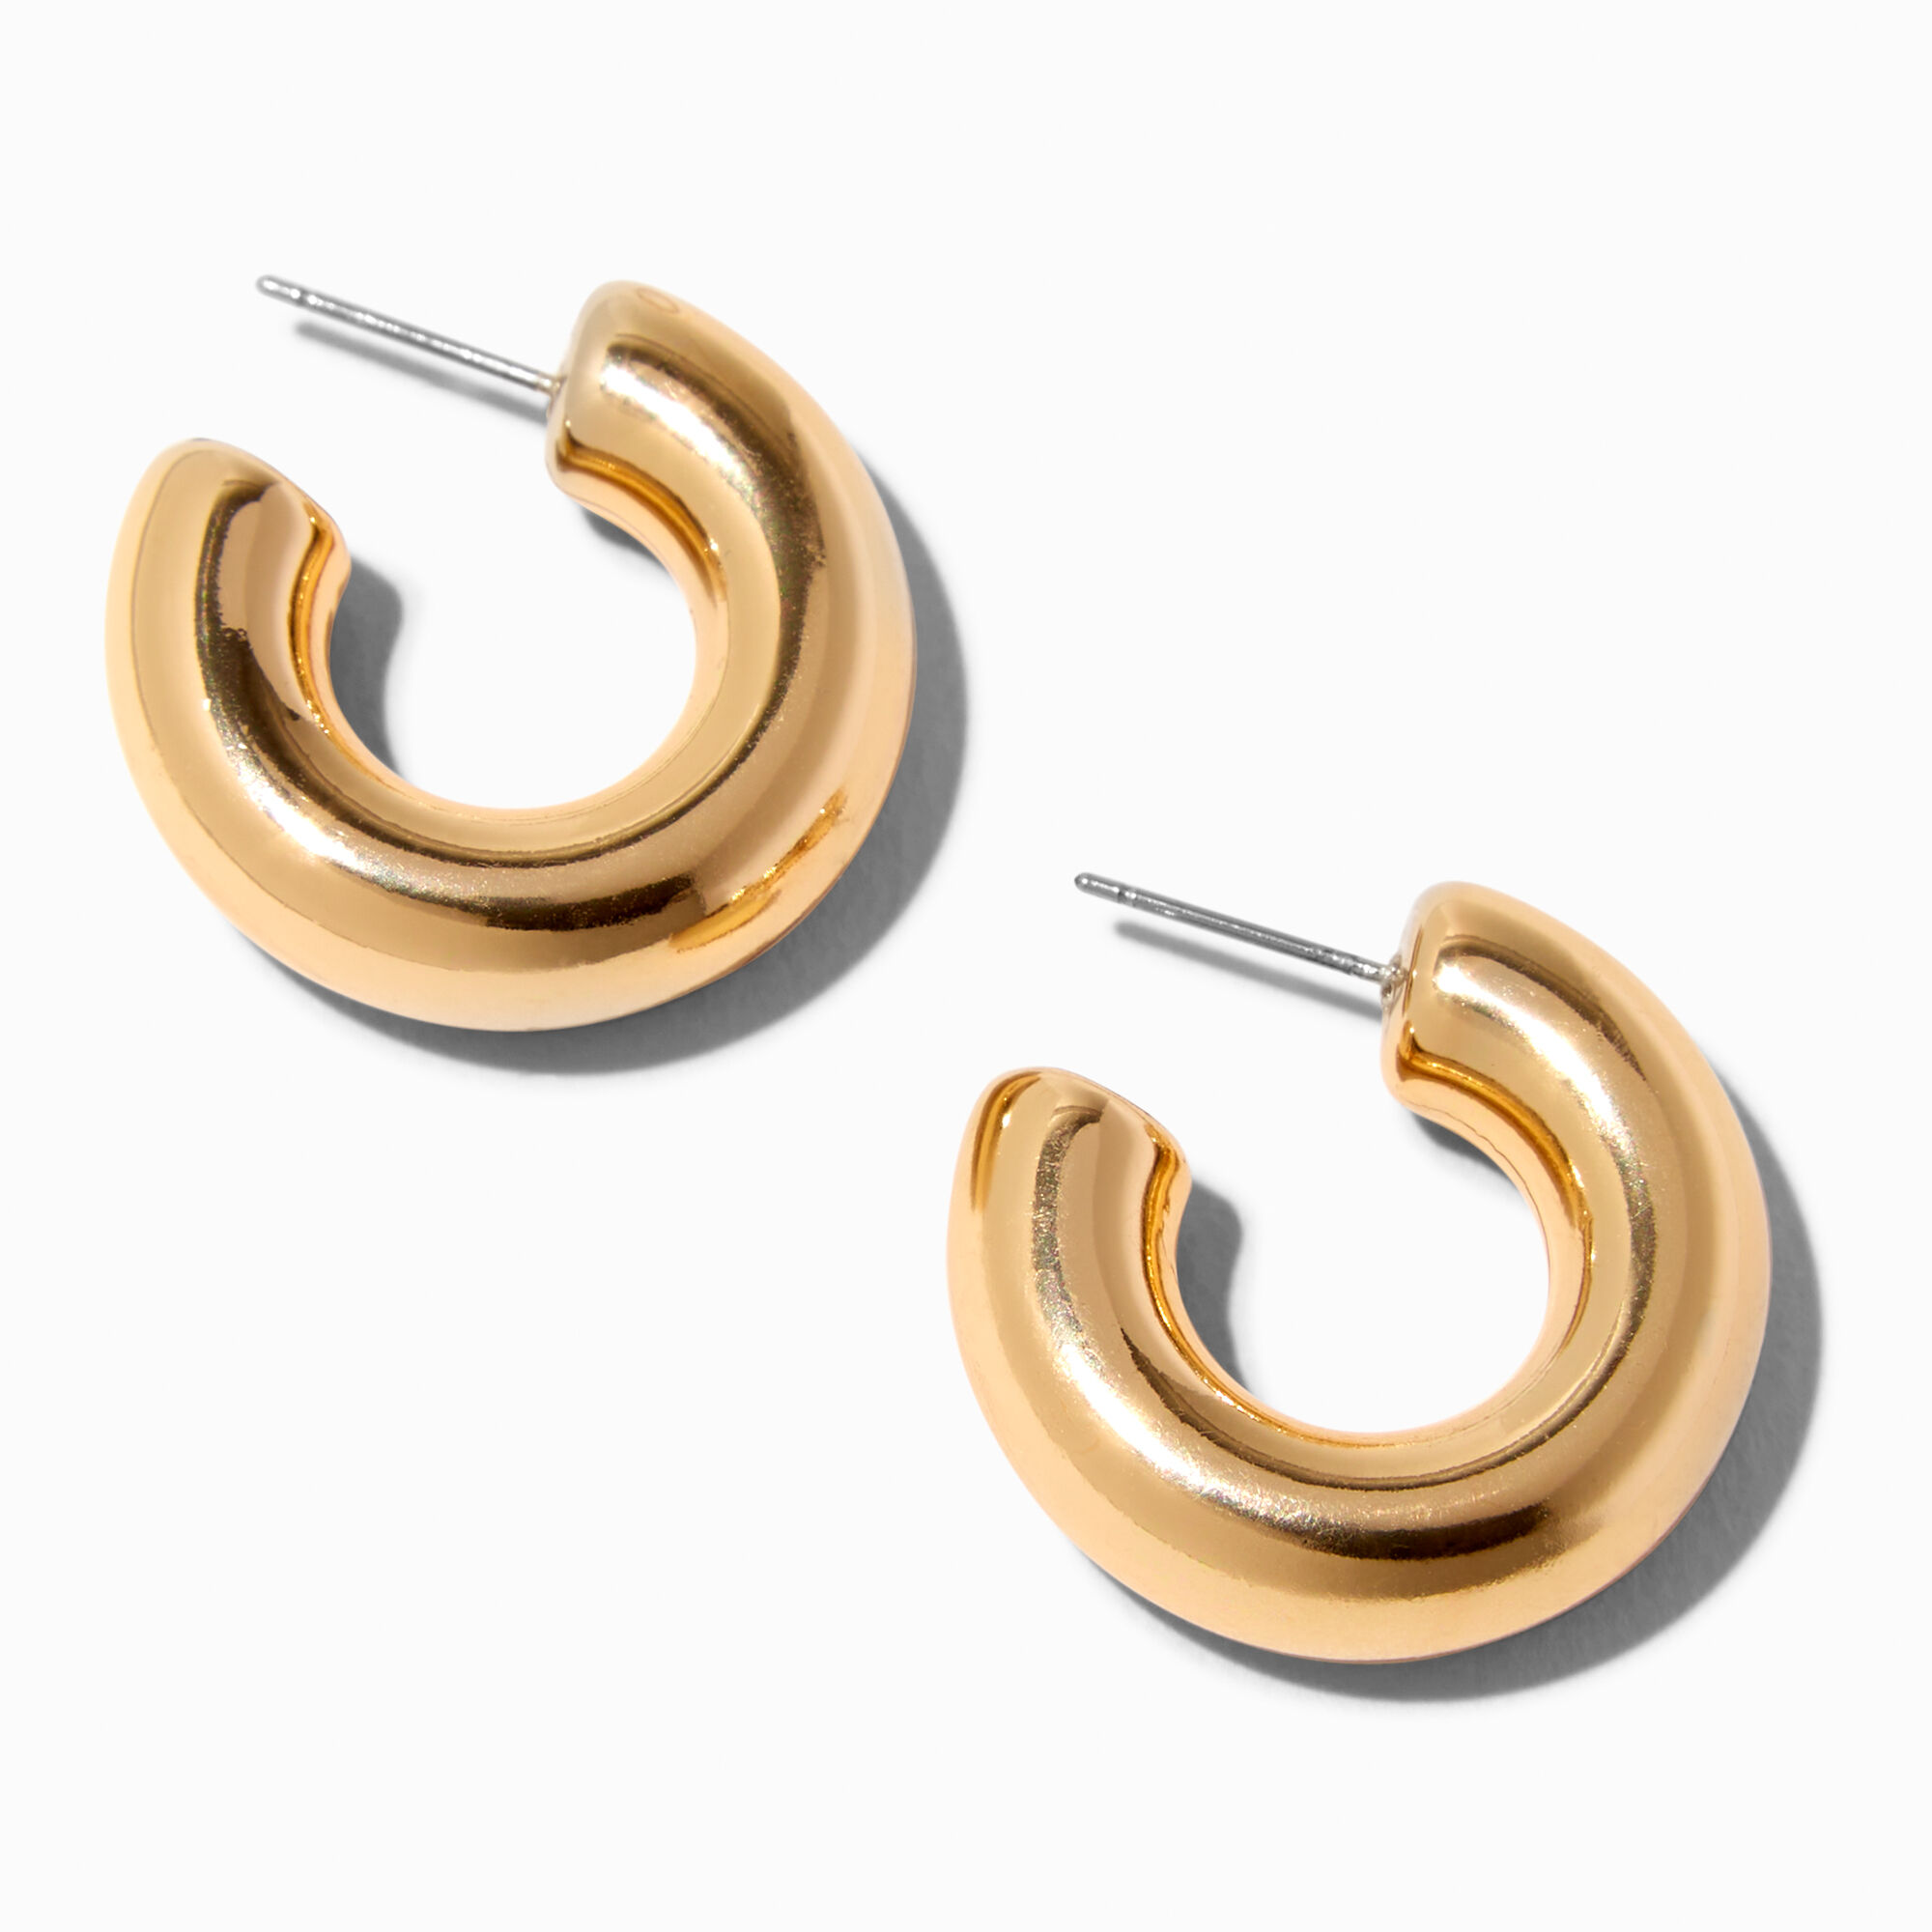 Claire's Accessories Kilkenny - New baby and toddler 9ct gold earrings  available now @claires | Facebook